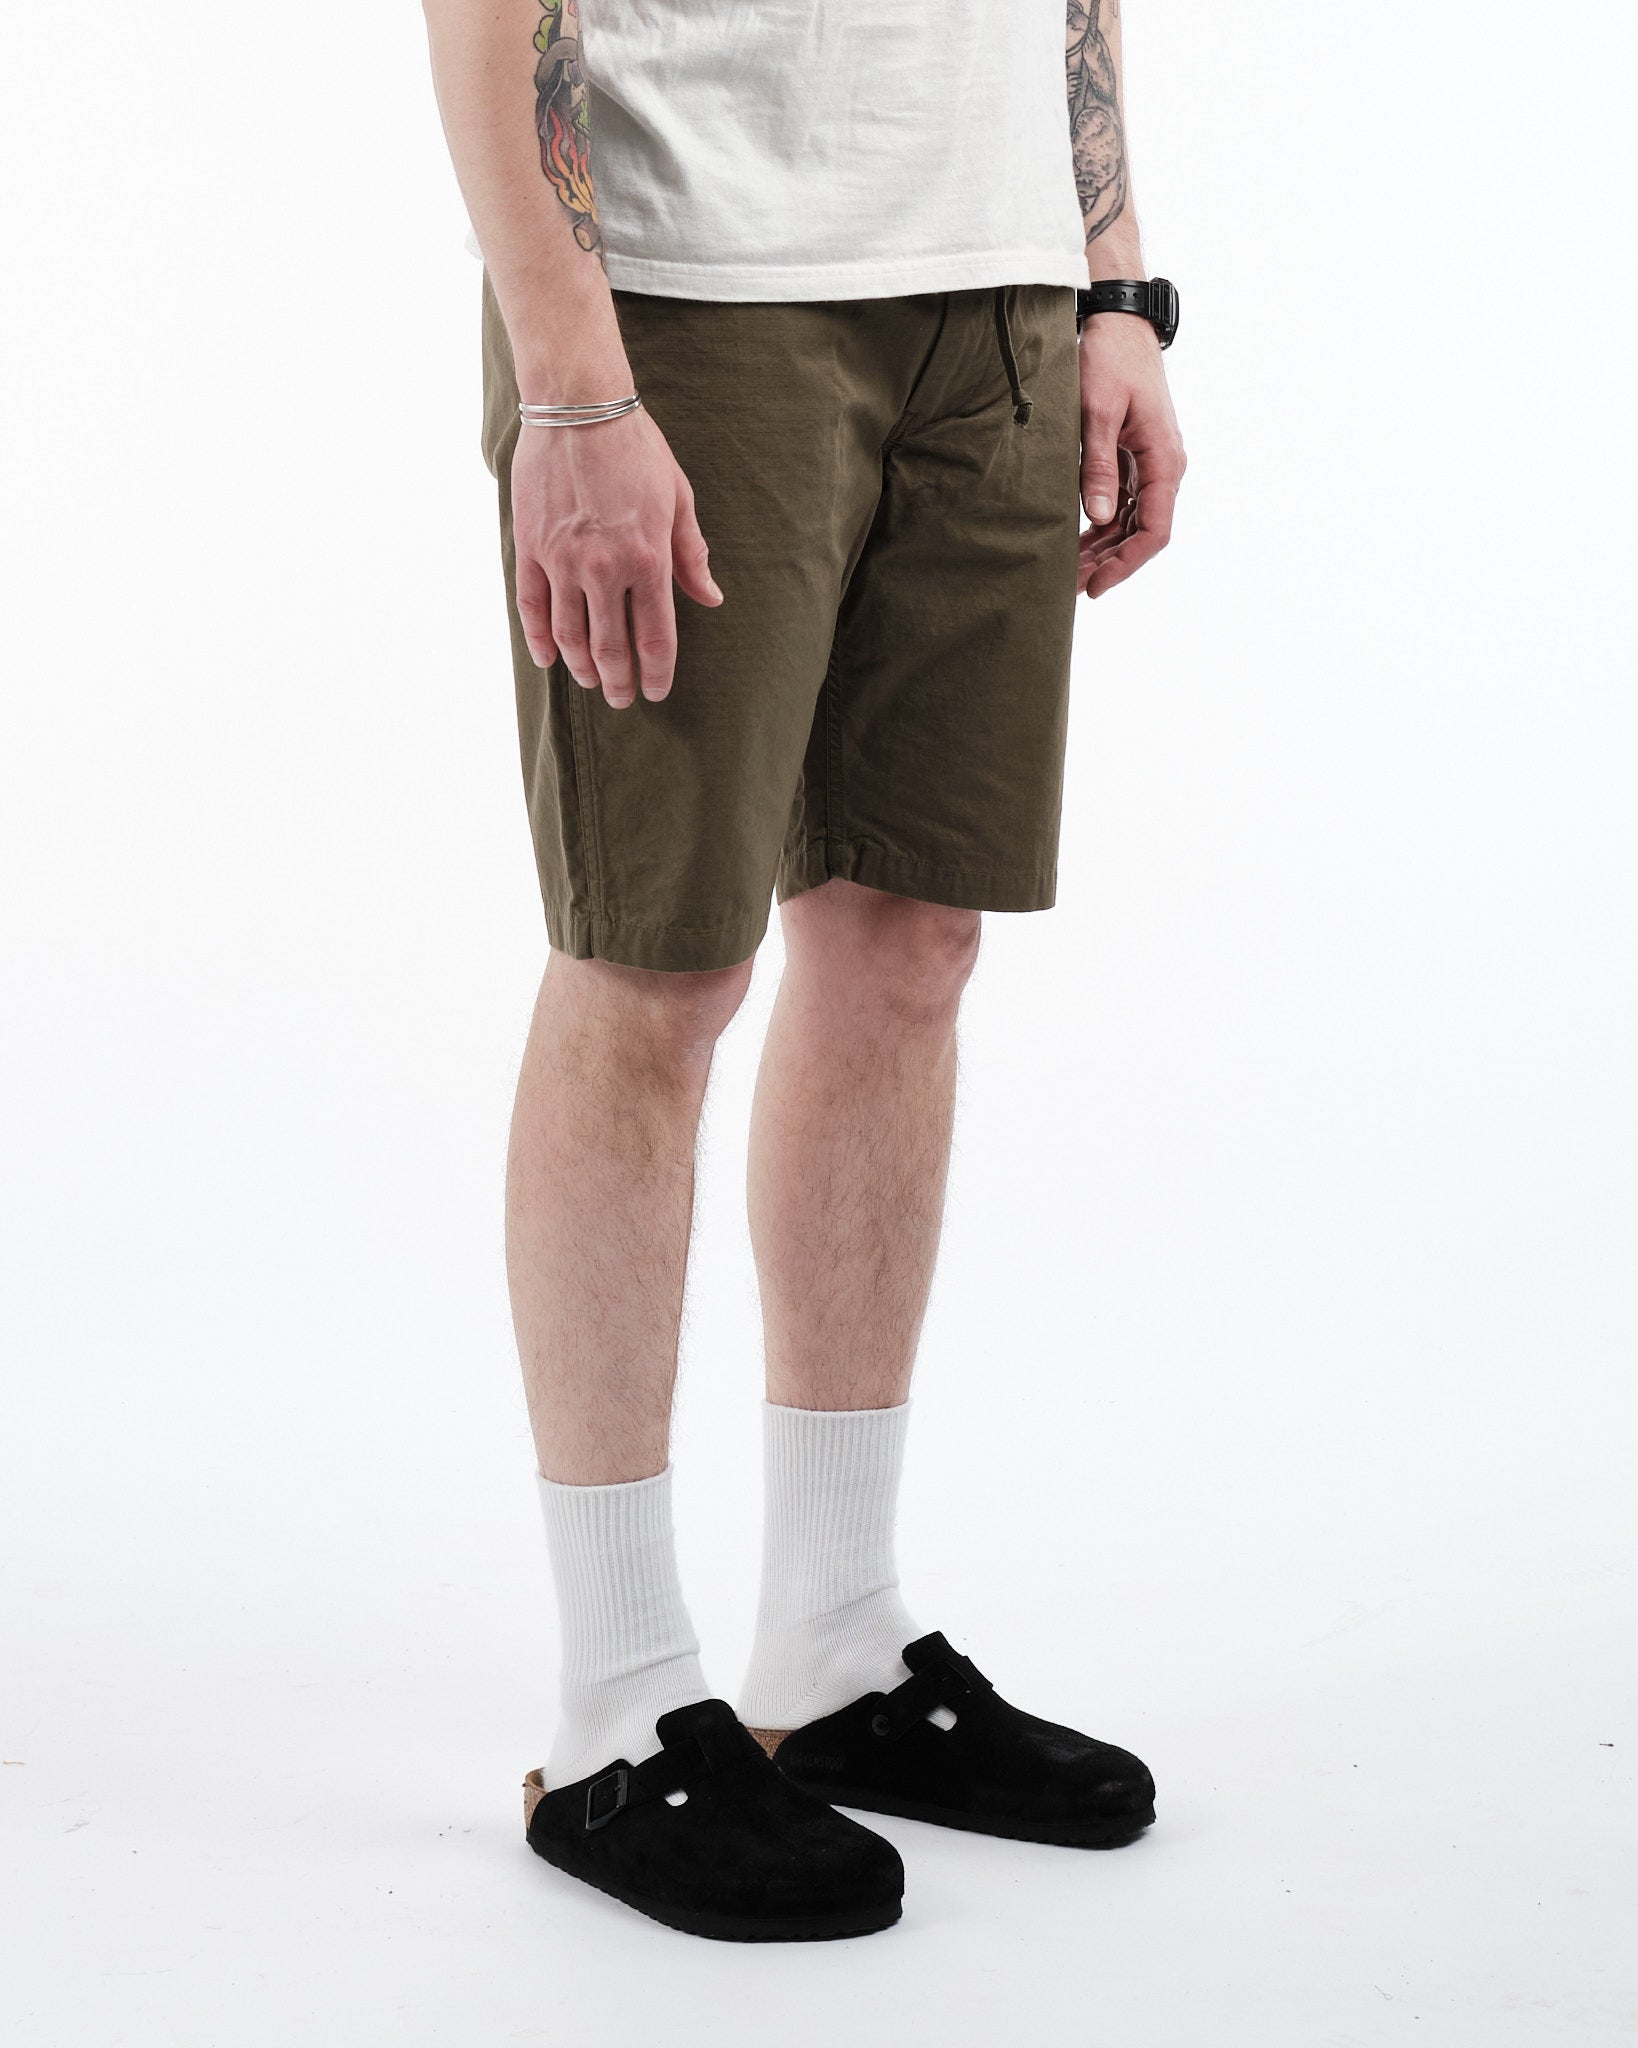 NEW YORKER SHORTS ARMY GREEN - Meadow